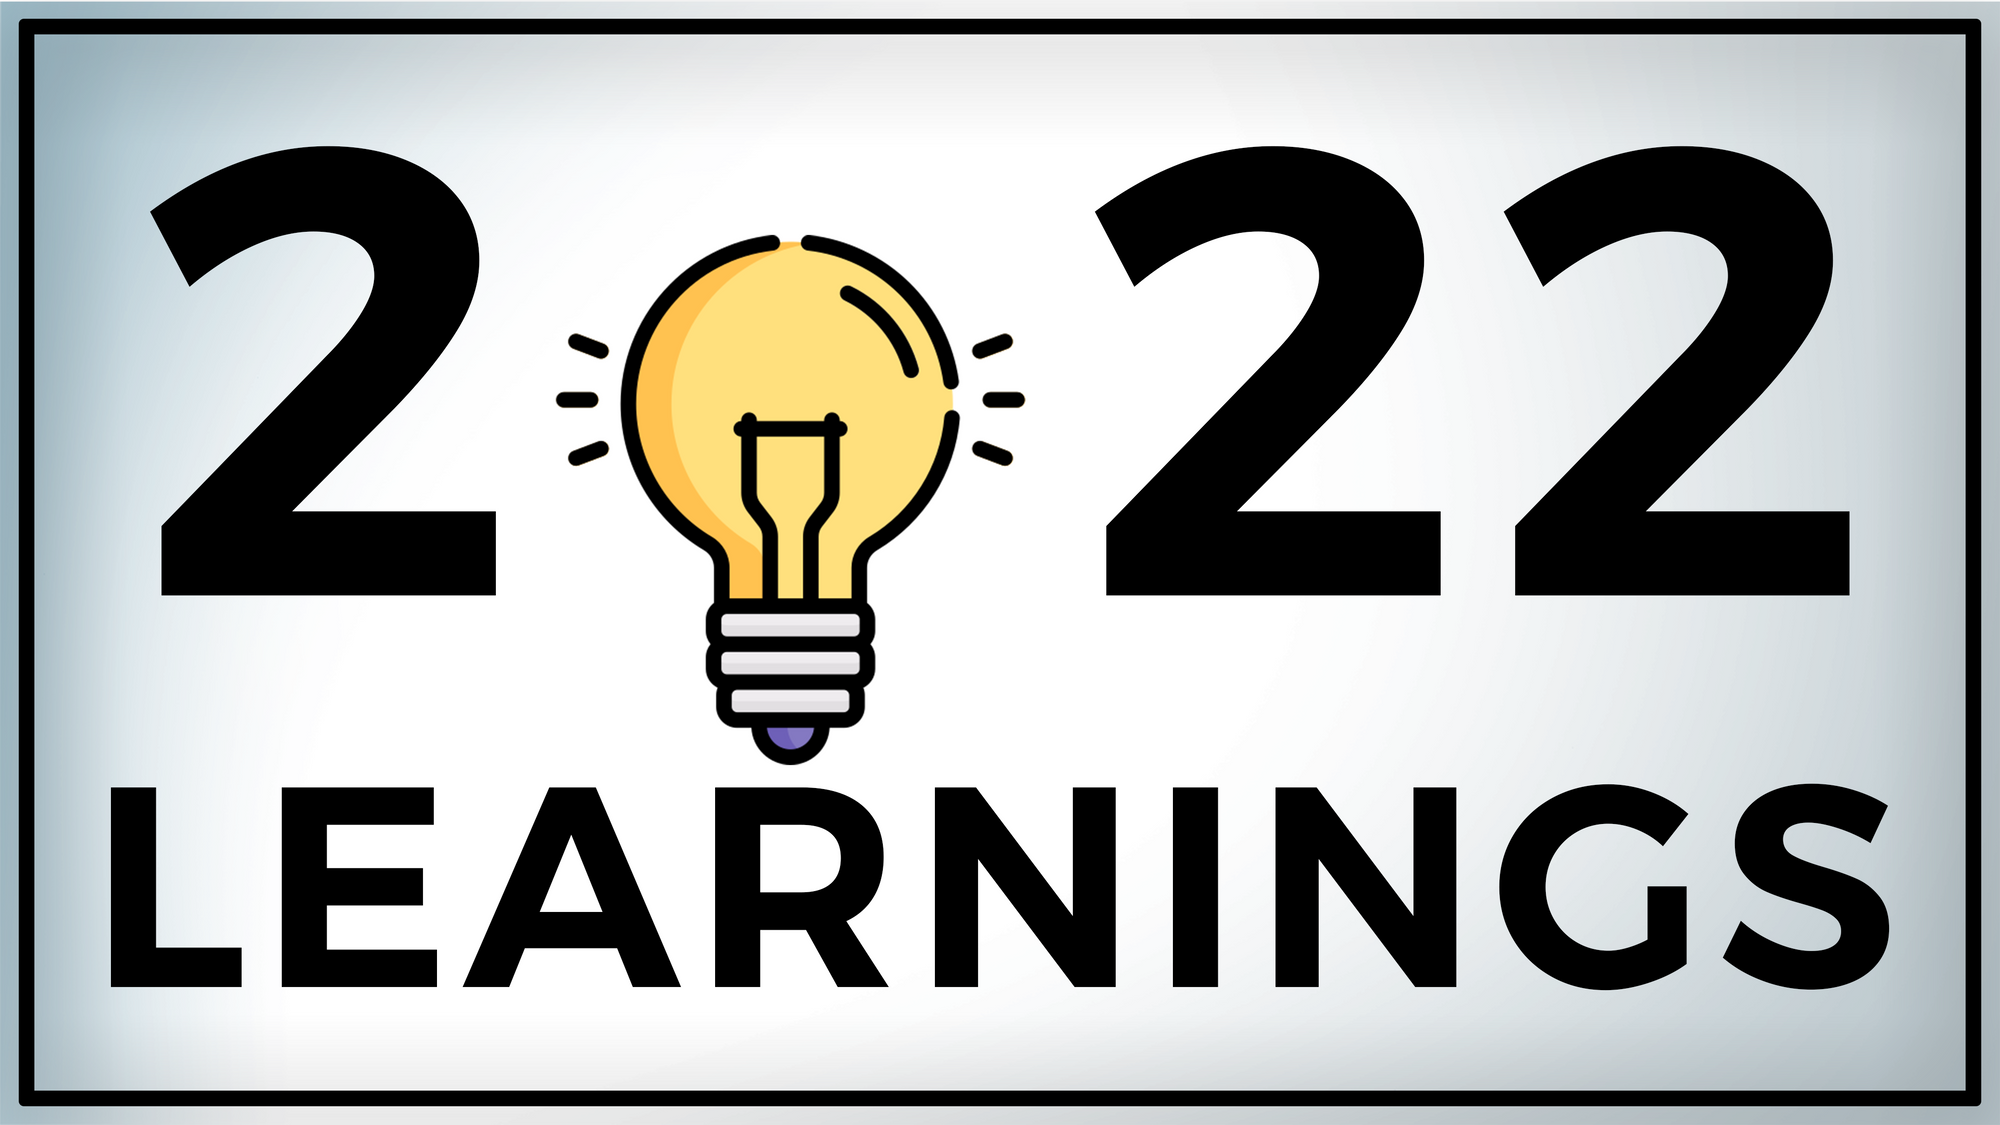 22 Lessons I Learned in 2022